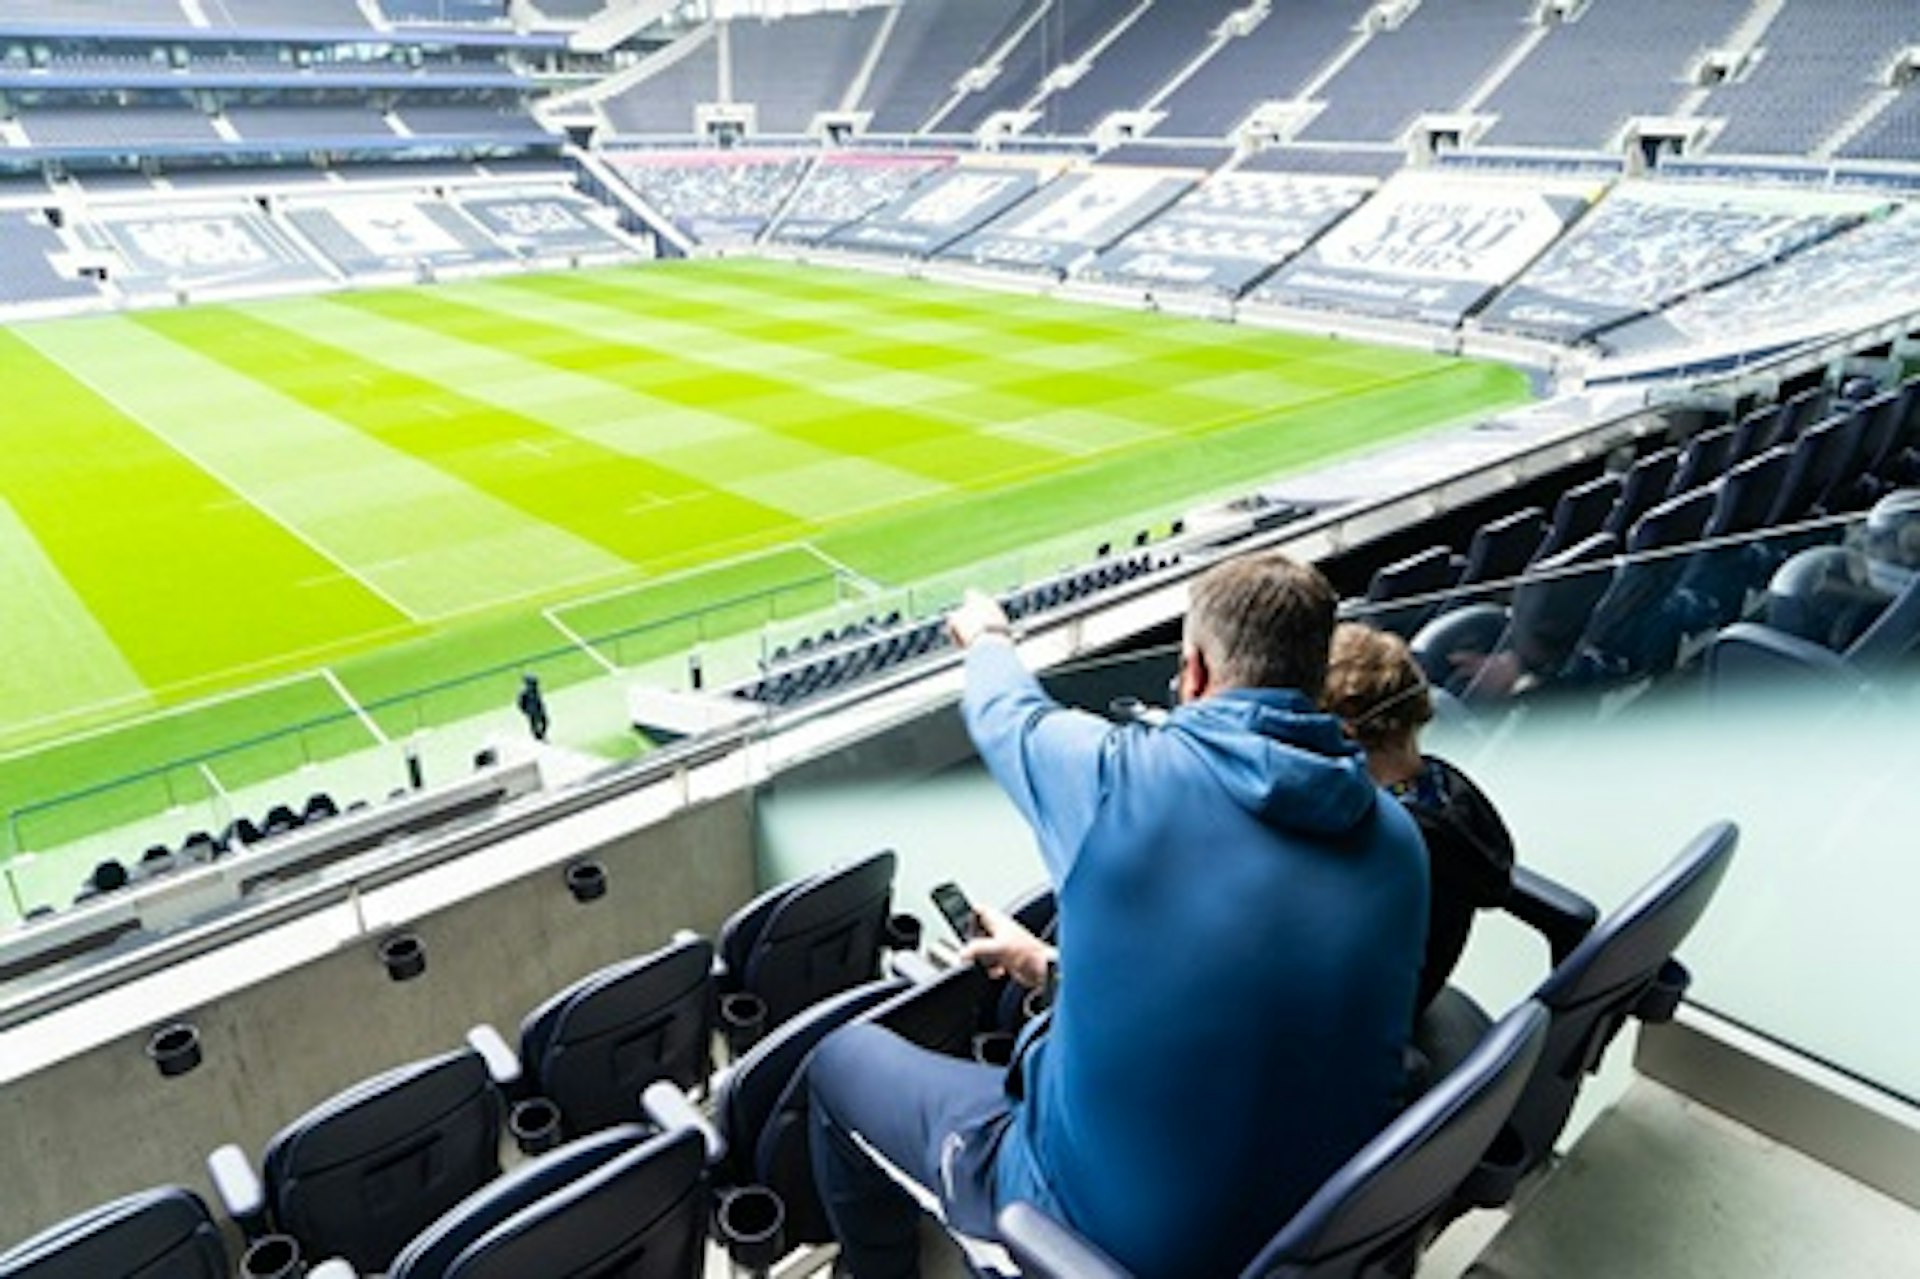 Tottenham Hotspur Stadium Tour for One Adult and One Child 1